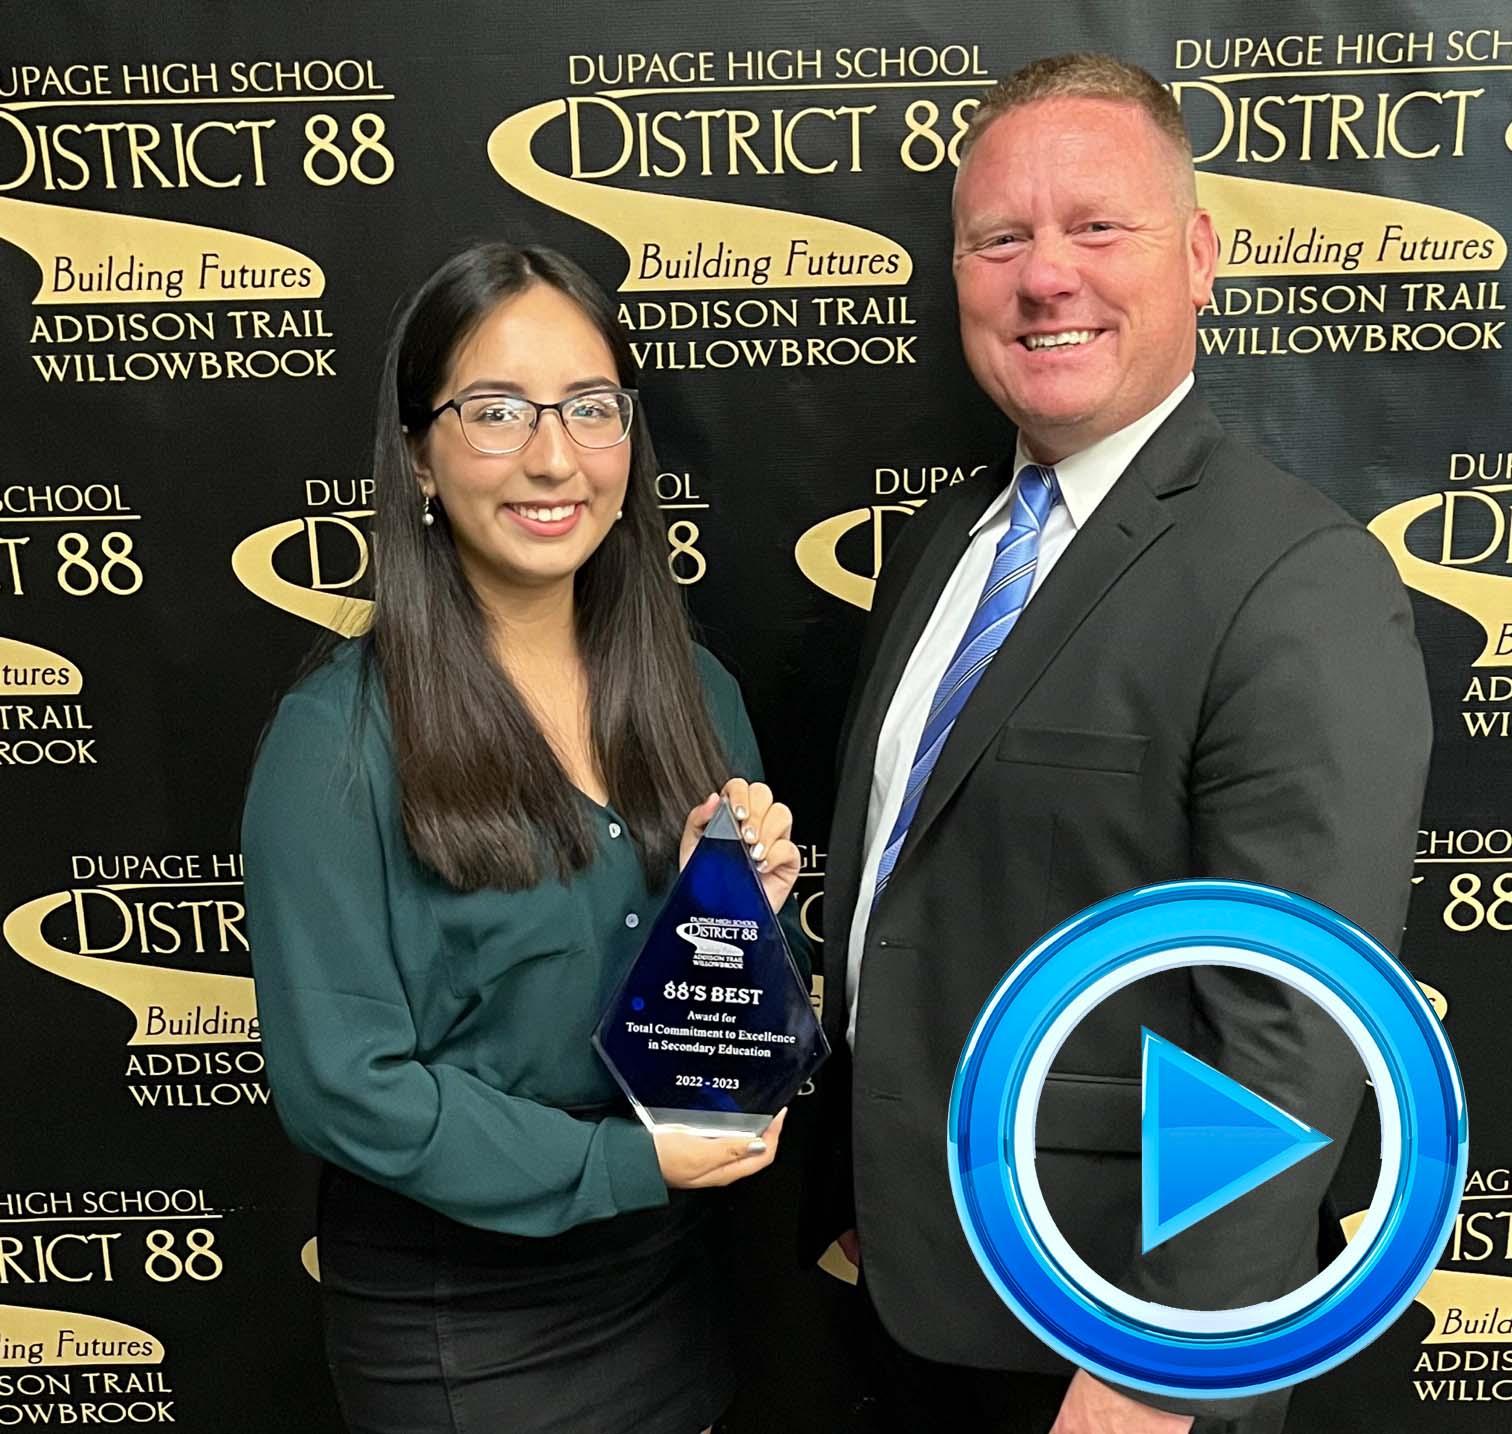 Willowbrook names September recipient of 88’s Best recognition